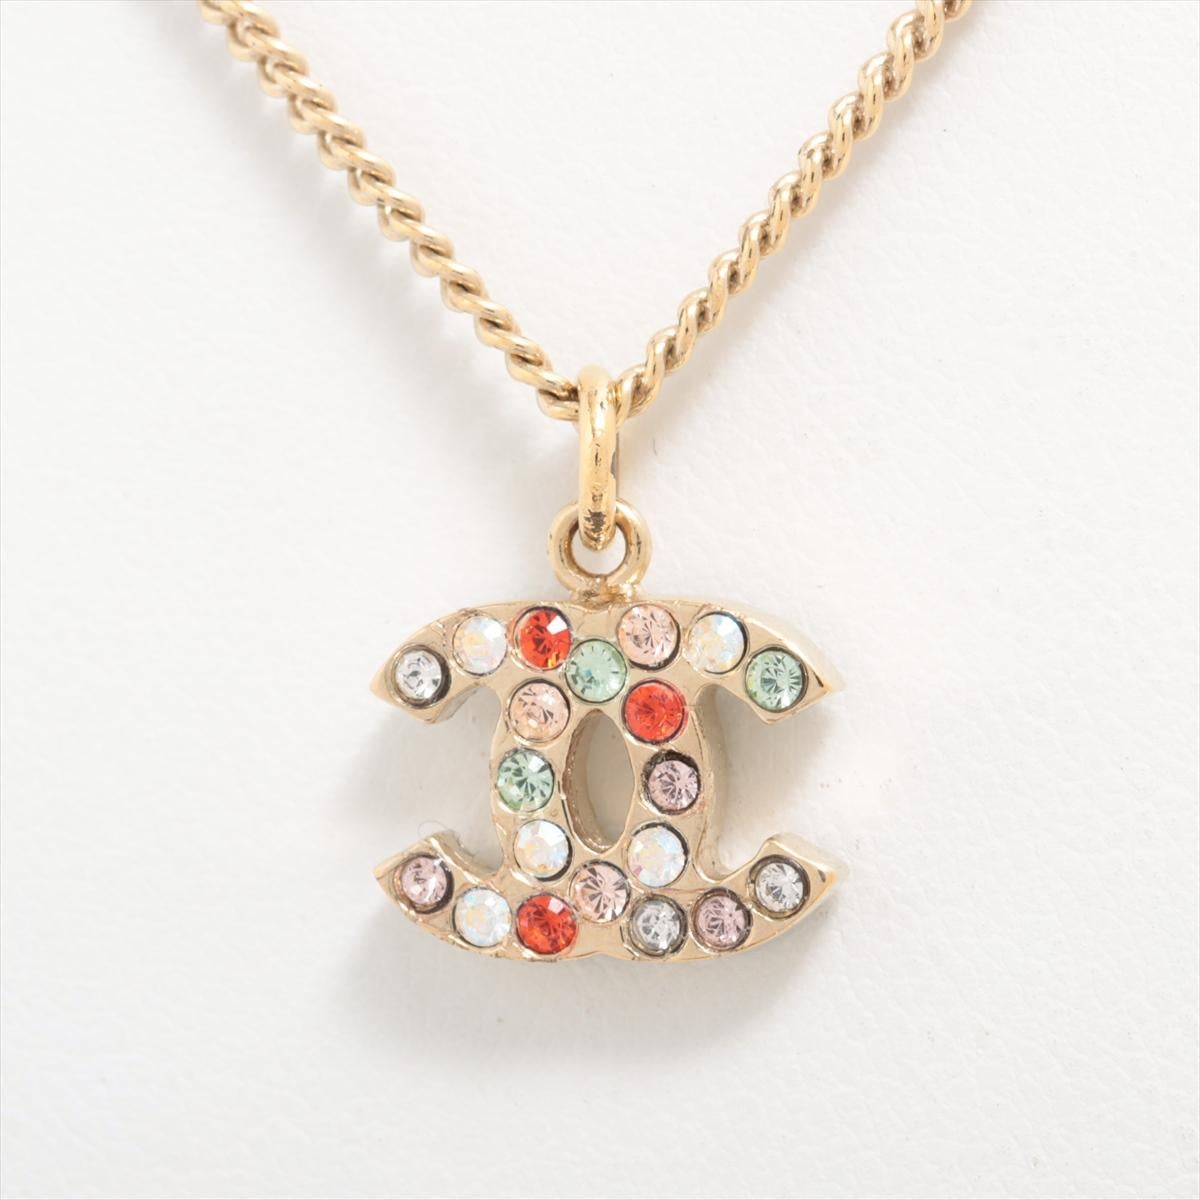 The Chanel CC Logo Multicolor Rhinestone Necklace in gold plated finish is a stunning accessory that seamlessly blends sophistication with vibrant charm. Featuring the iconic double C logo adorned with multicolored rhinestones alongside plain